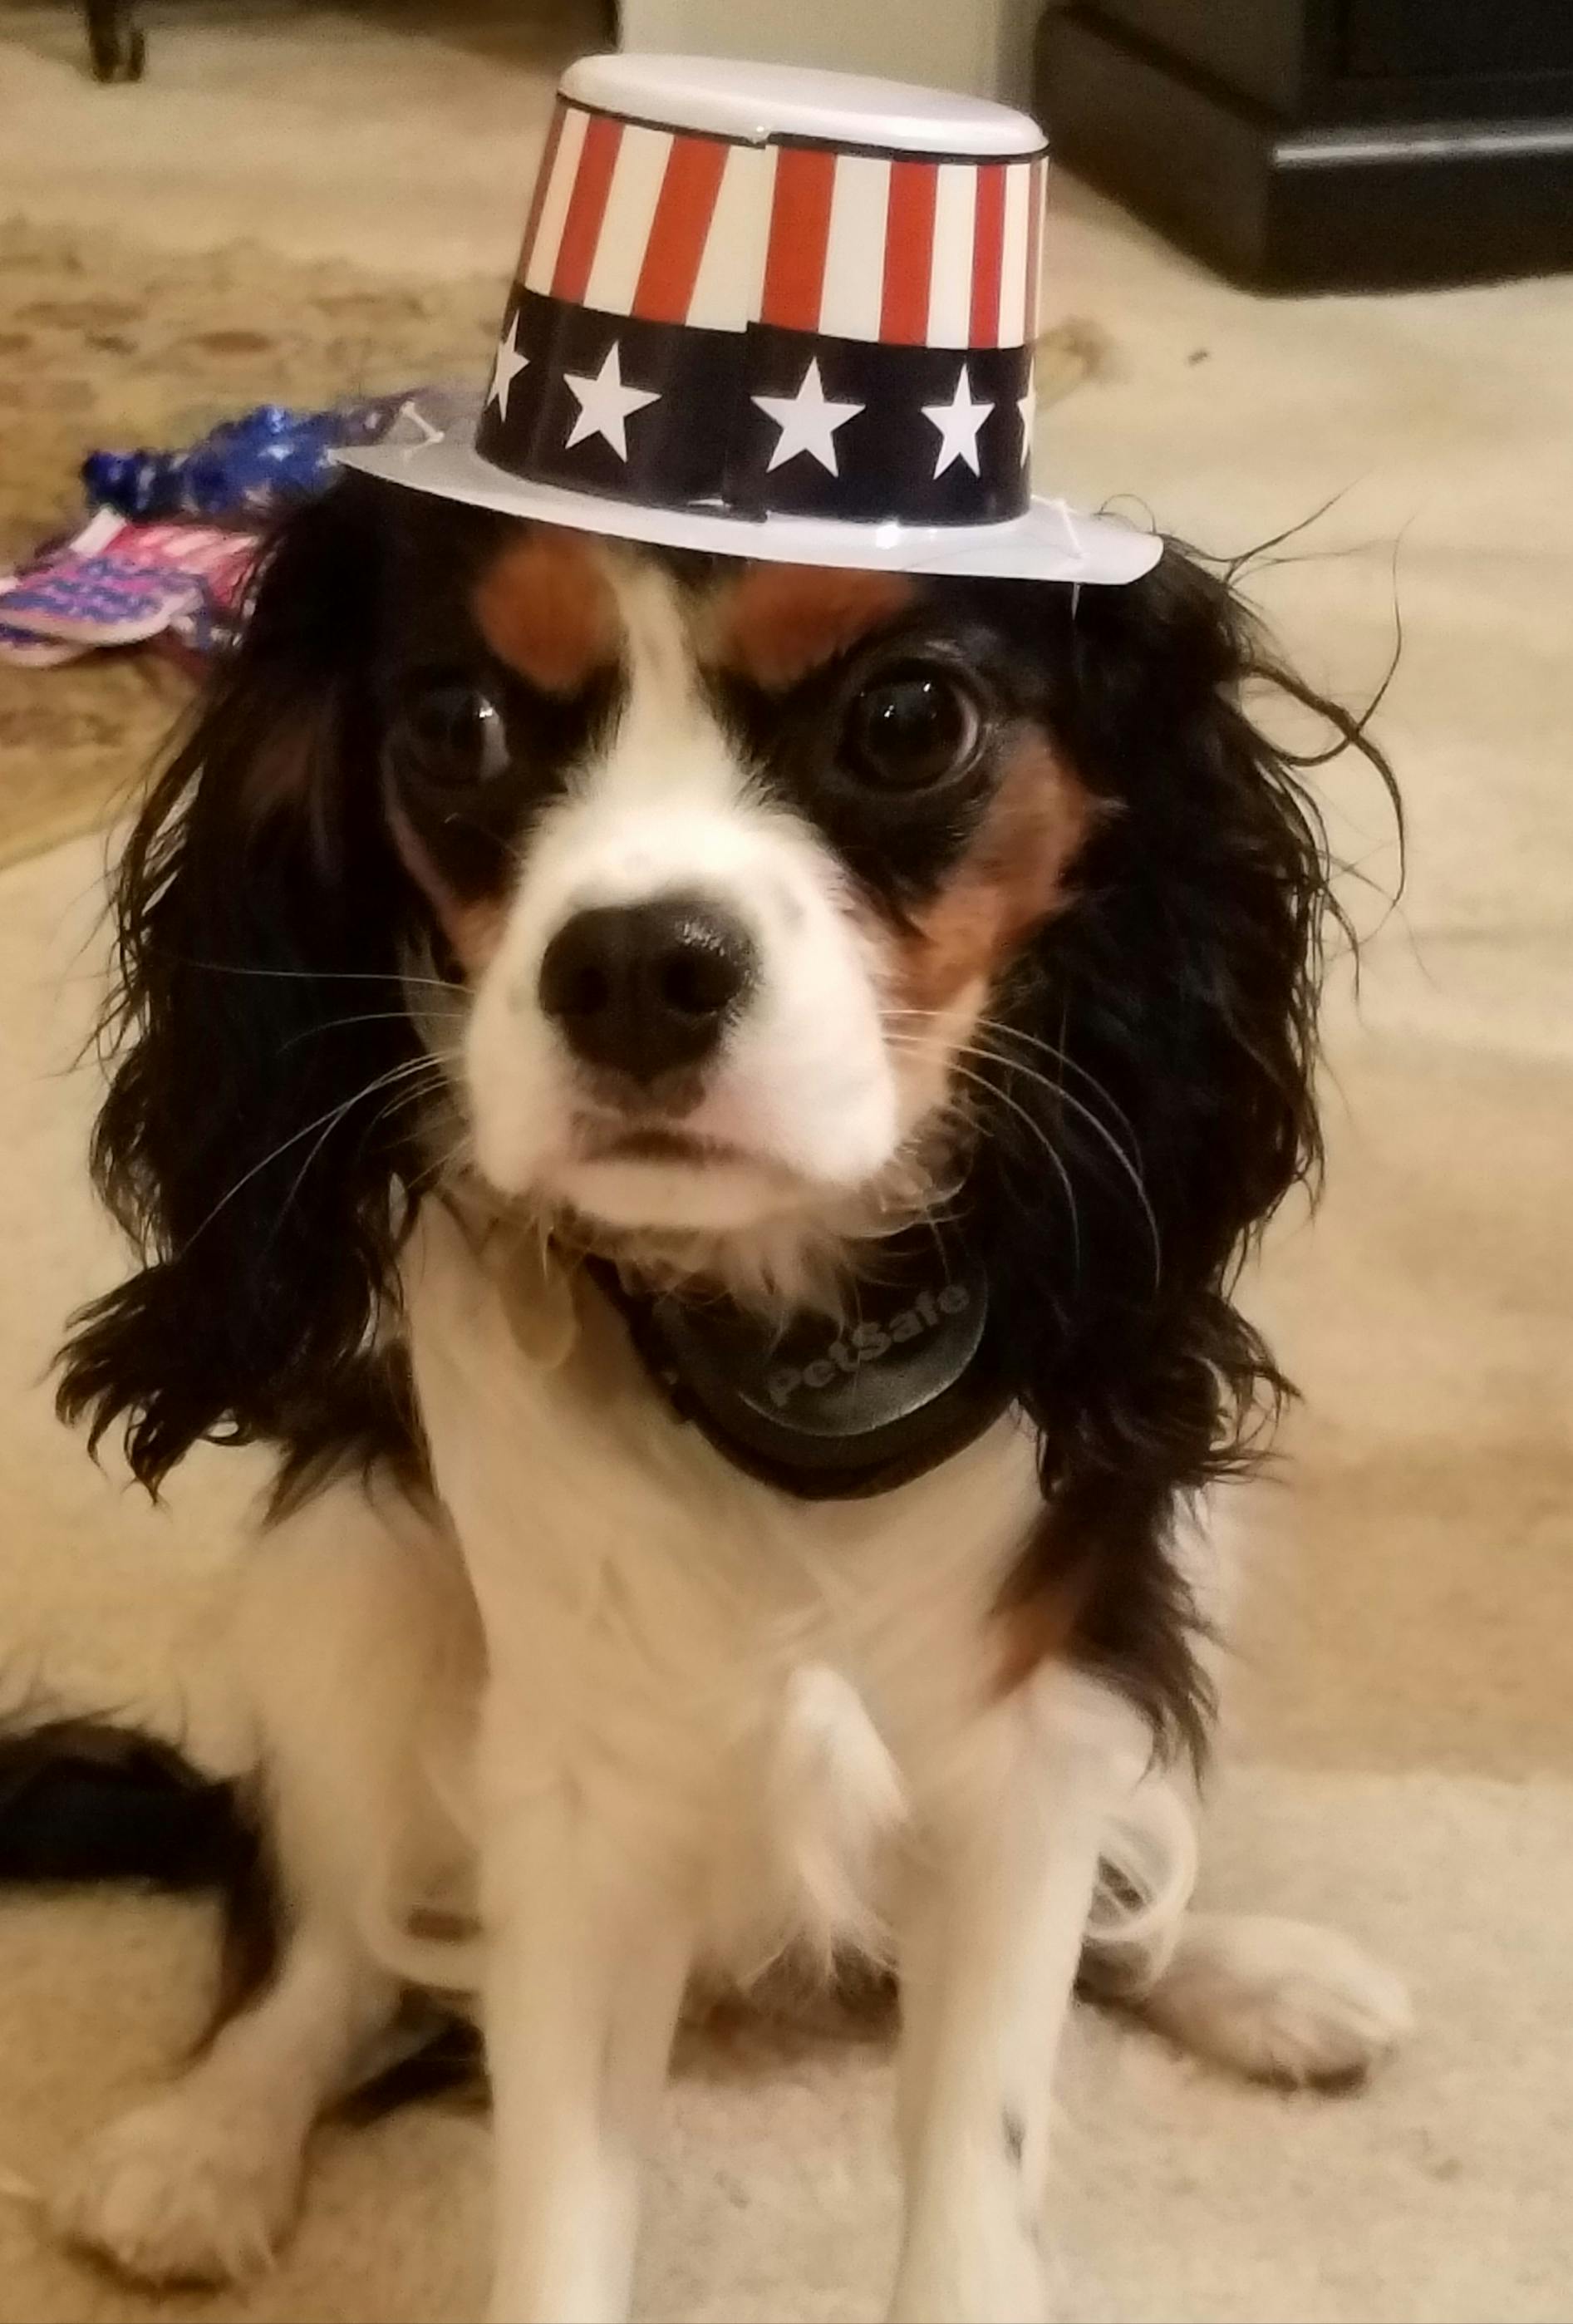 Free stock photo of Cavalier King Charles Spaniel, dog with hat, patriotic dog